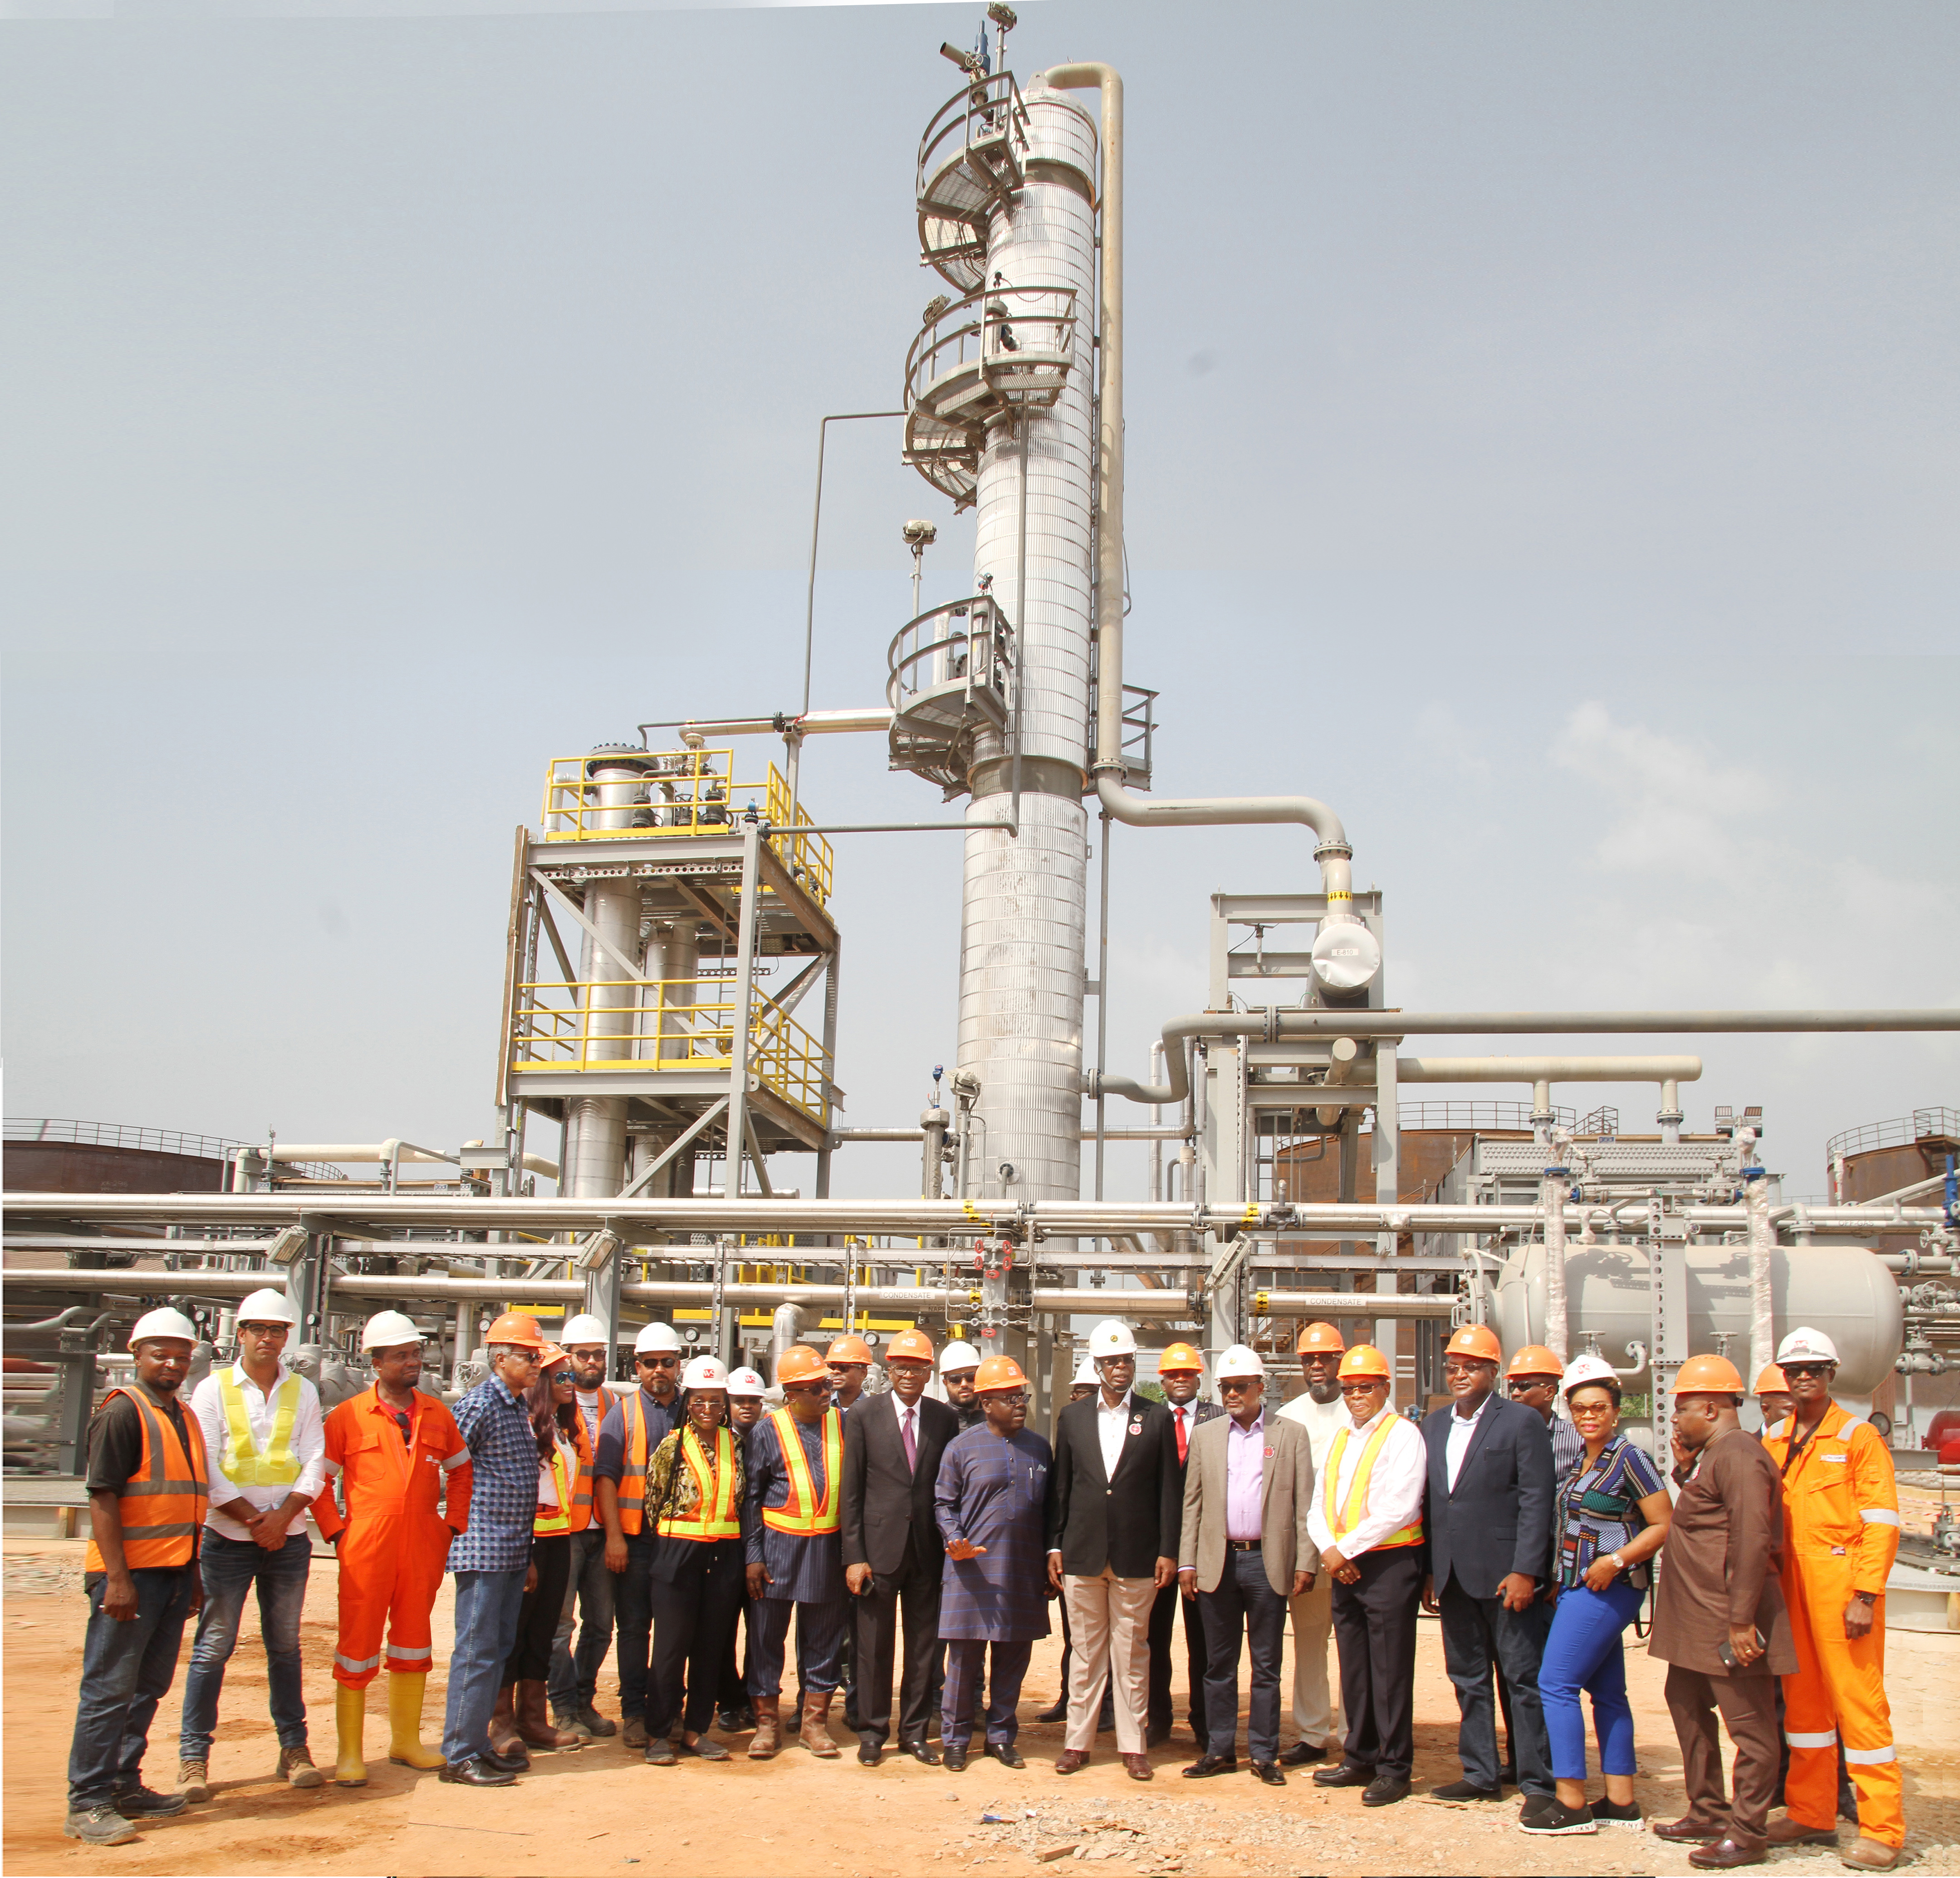 Minister of State for Petroleum Resource, Sylva Receives Phase 1 Presentation on Waltersmith Modular Refinery in Ohaji/Egbema in Imo State